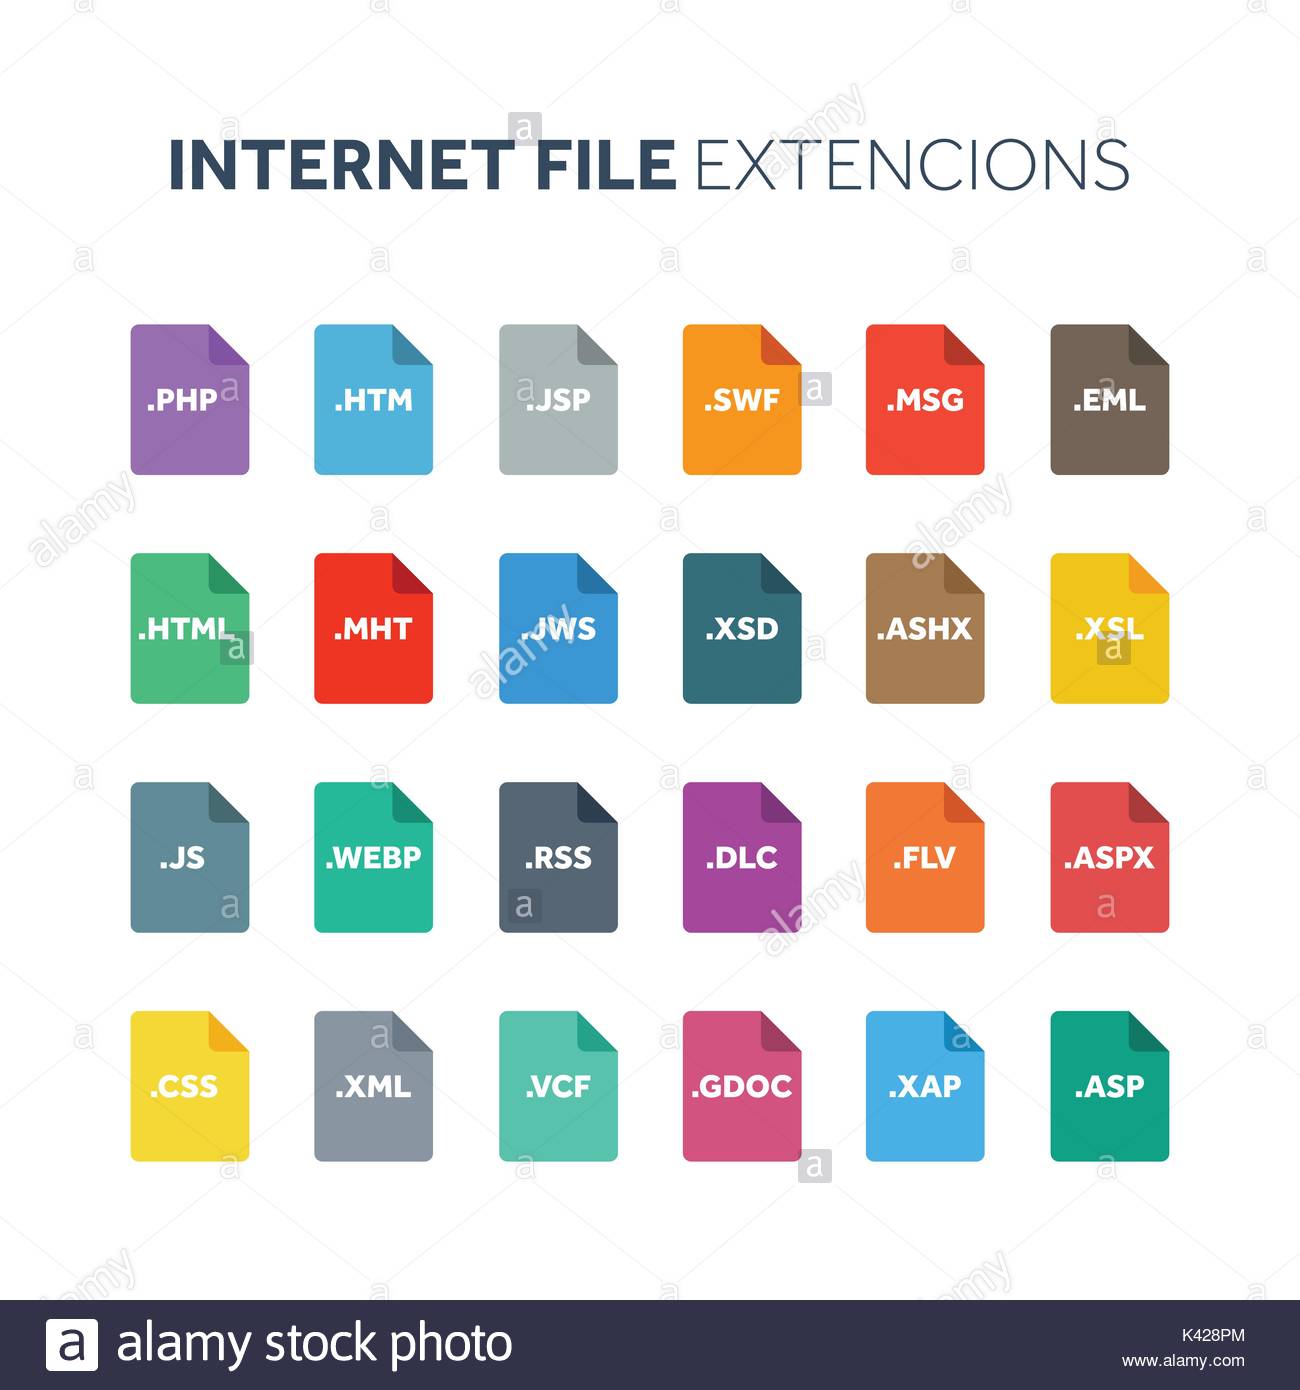 File Types 40 free icons (SVG, EPS, PSD, PNG files)